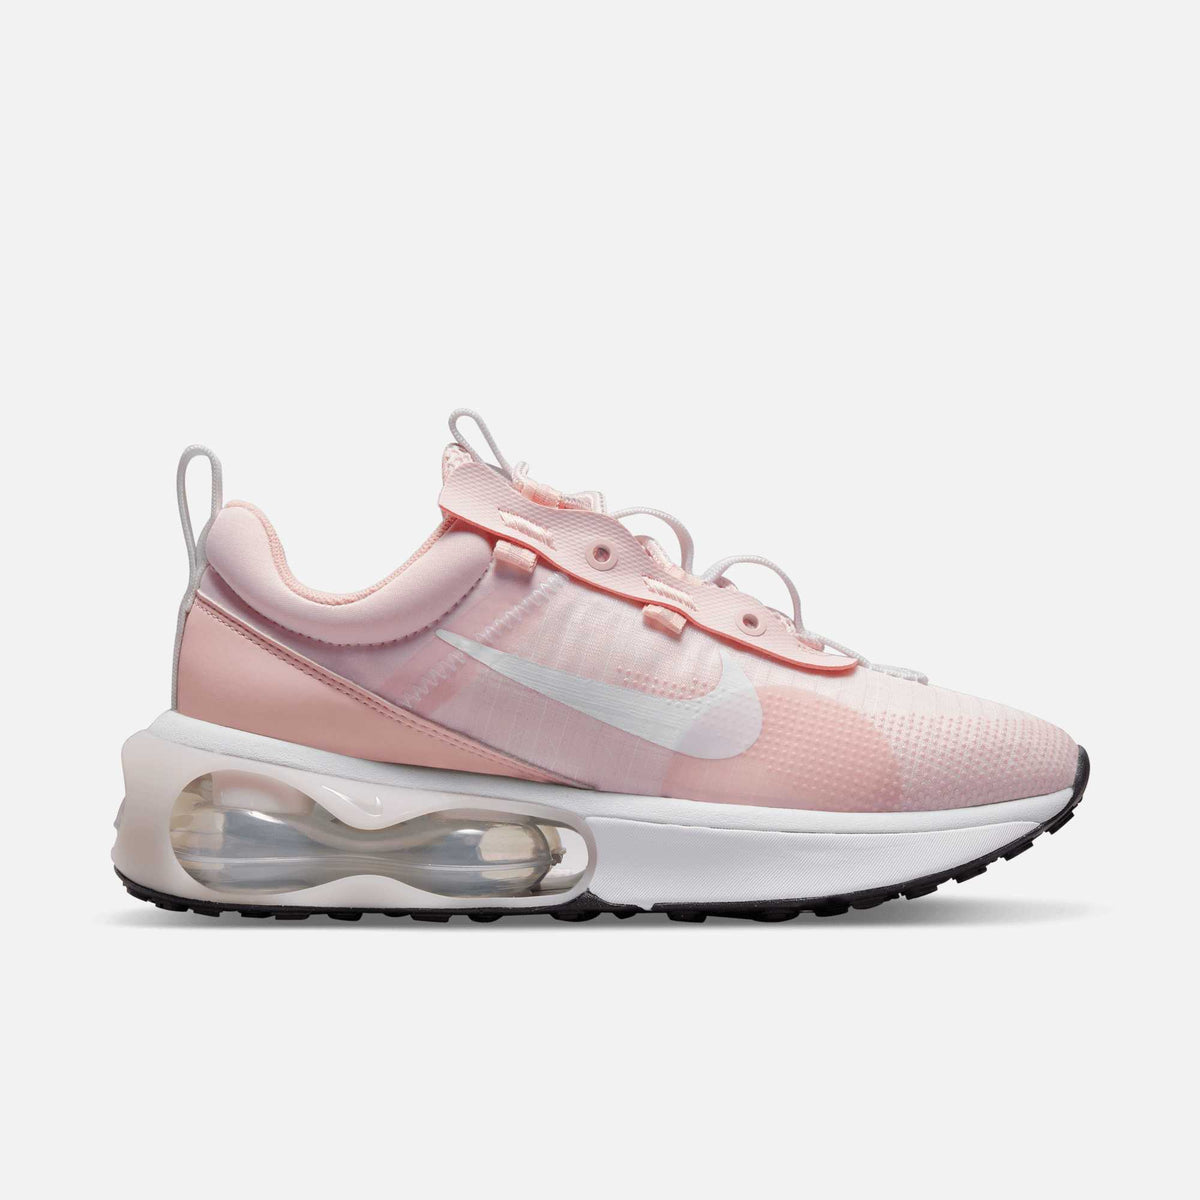 empleo Odia exhaustivo Nike Women's Air Max 2021 Barely Rose - Puffer Reds